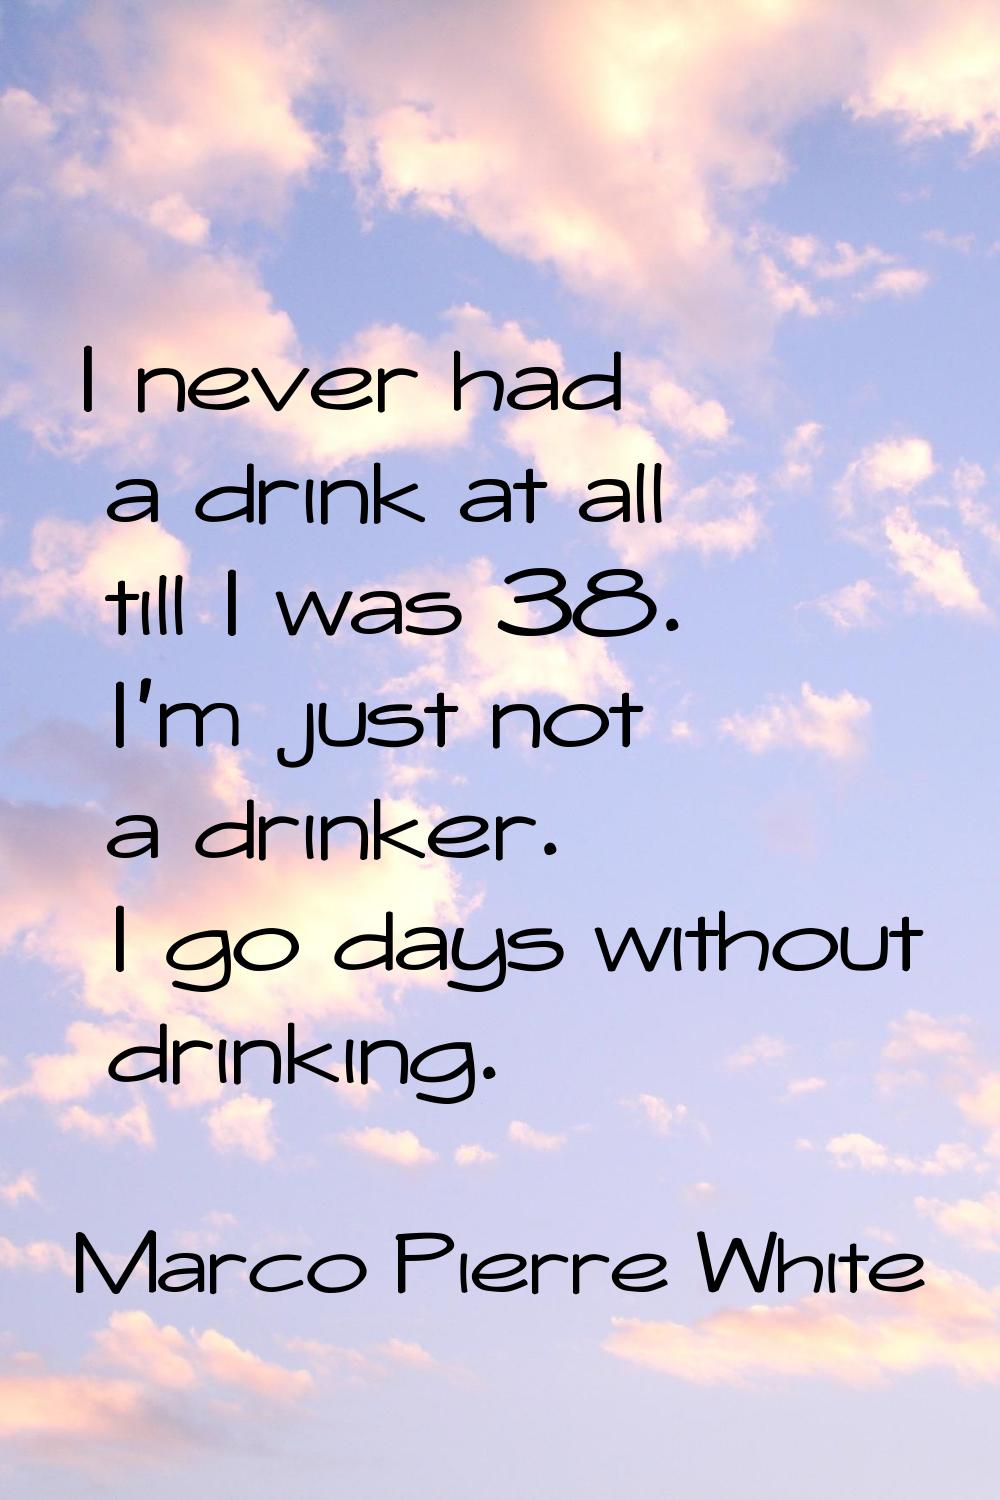 I never had a drink at all till I was 38. I'm just not a drinker. I go days without drinking.